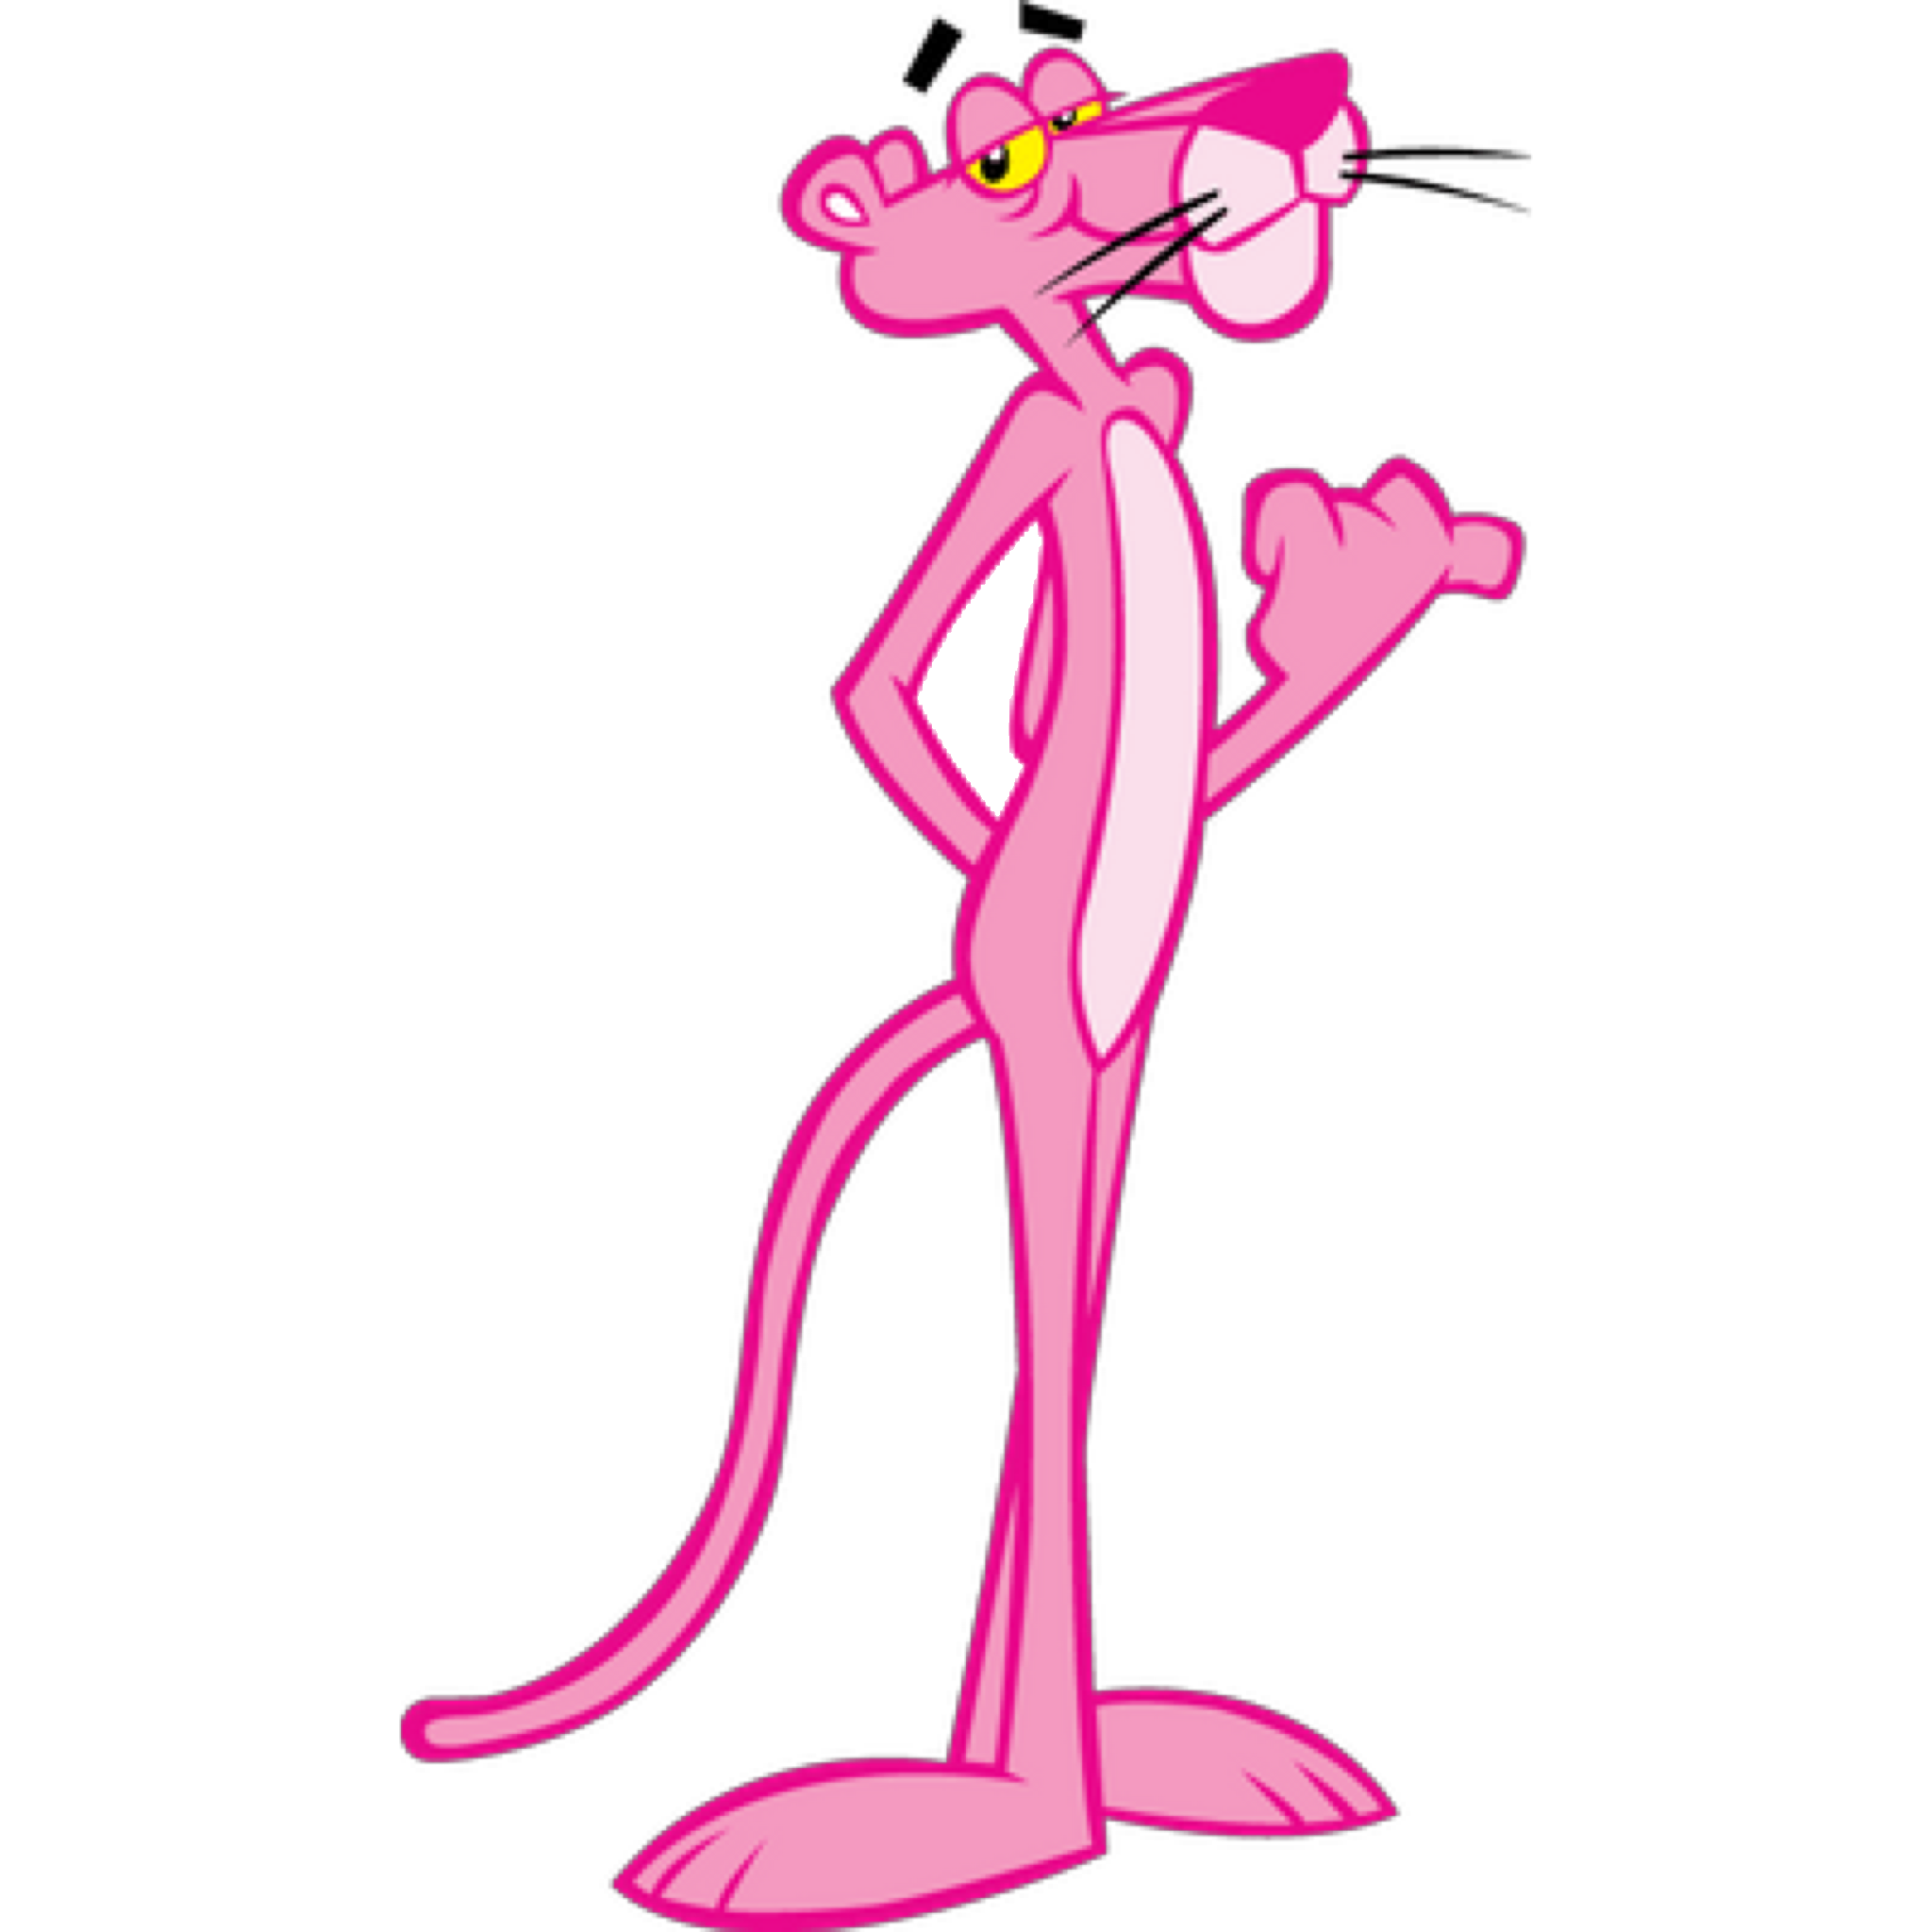 the official pink panther